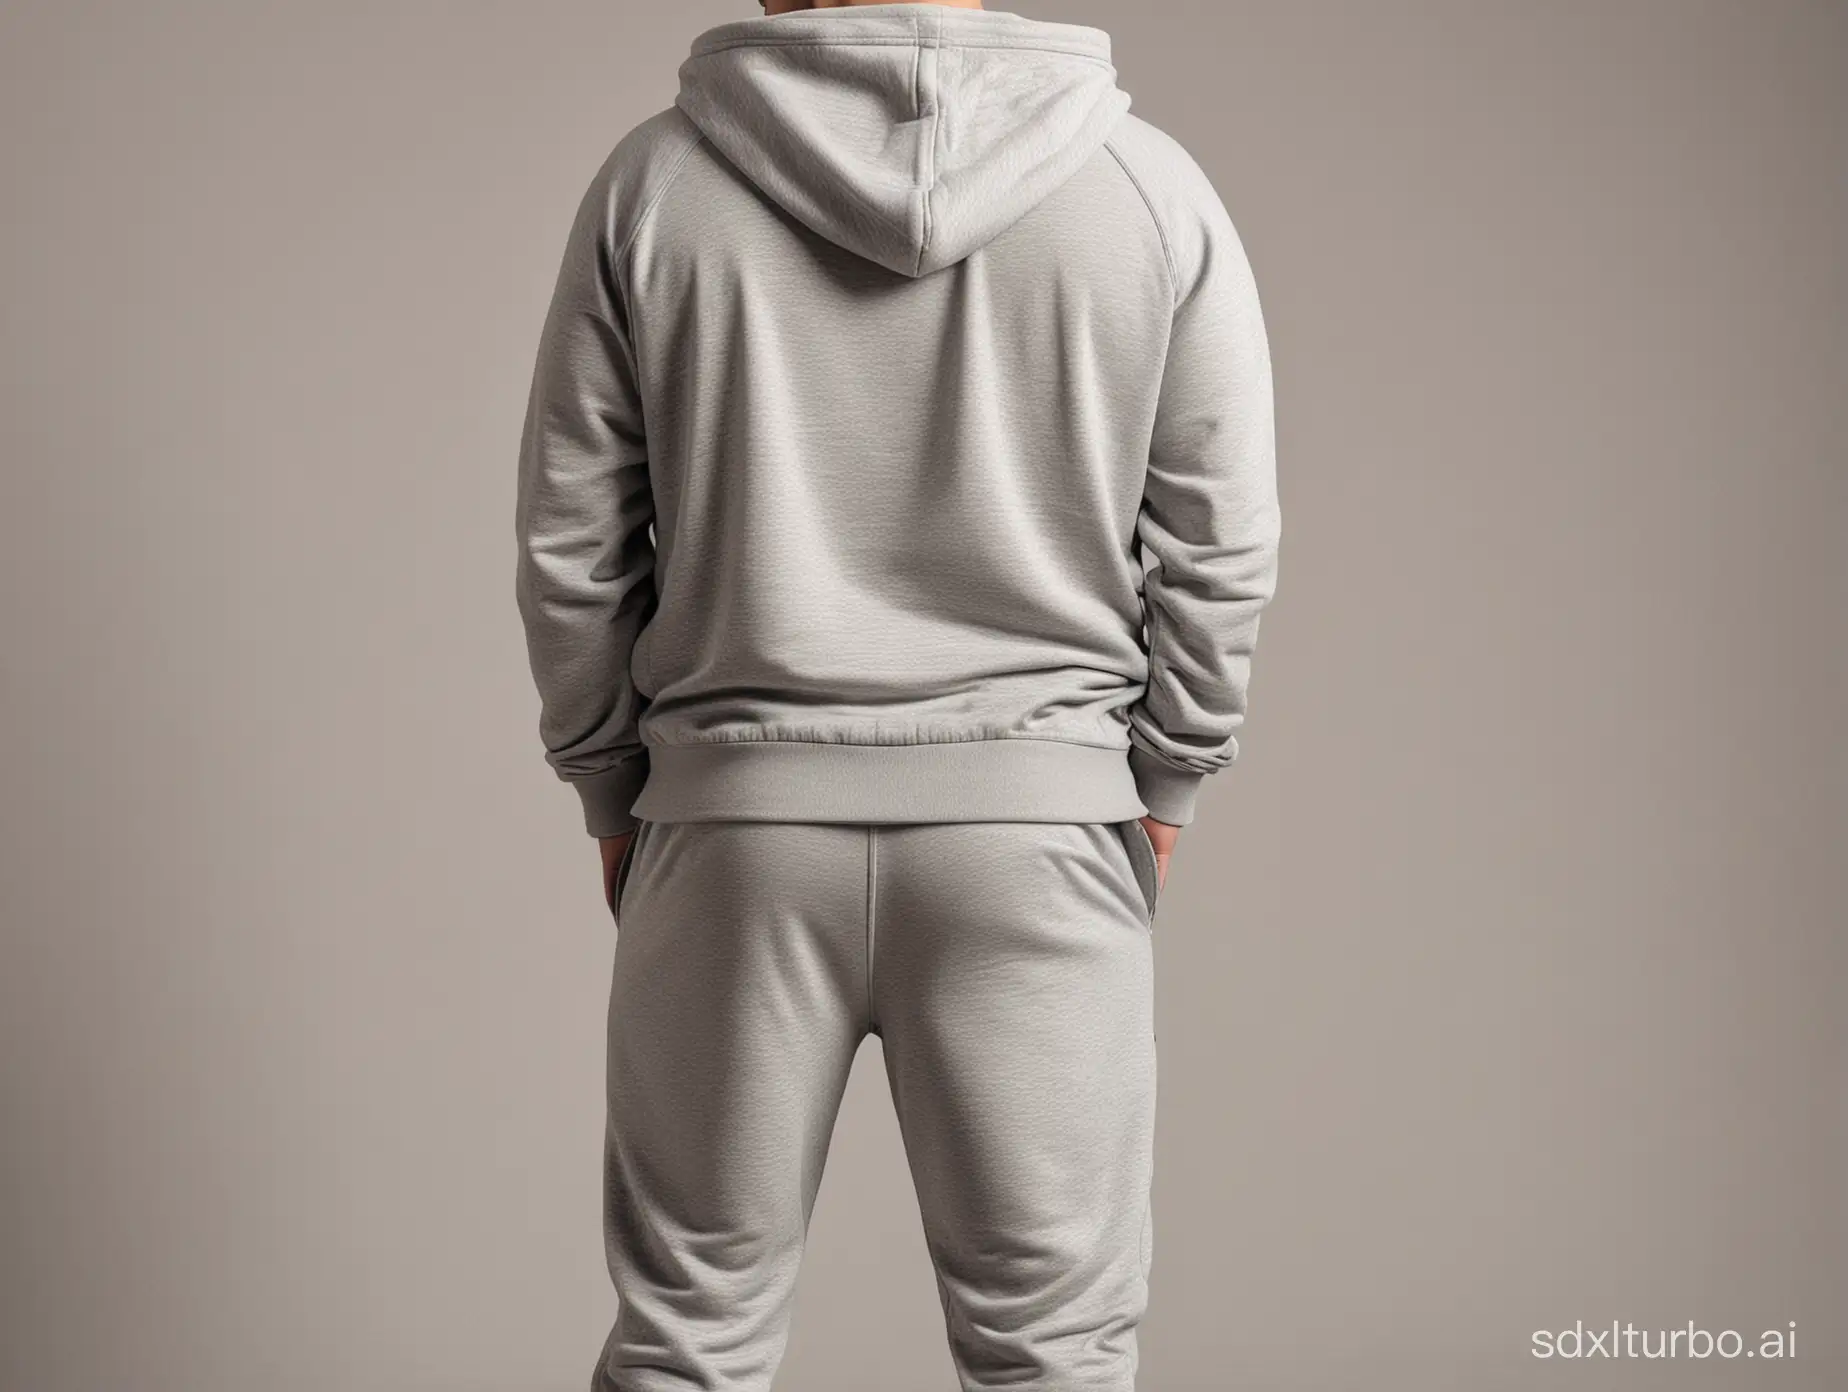 A man in a tracksuit, from behind, full figure.